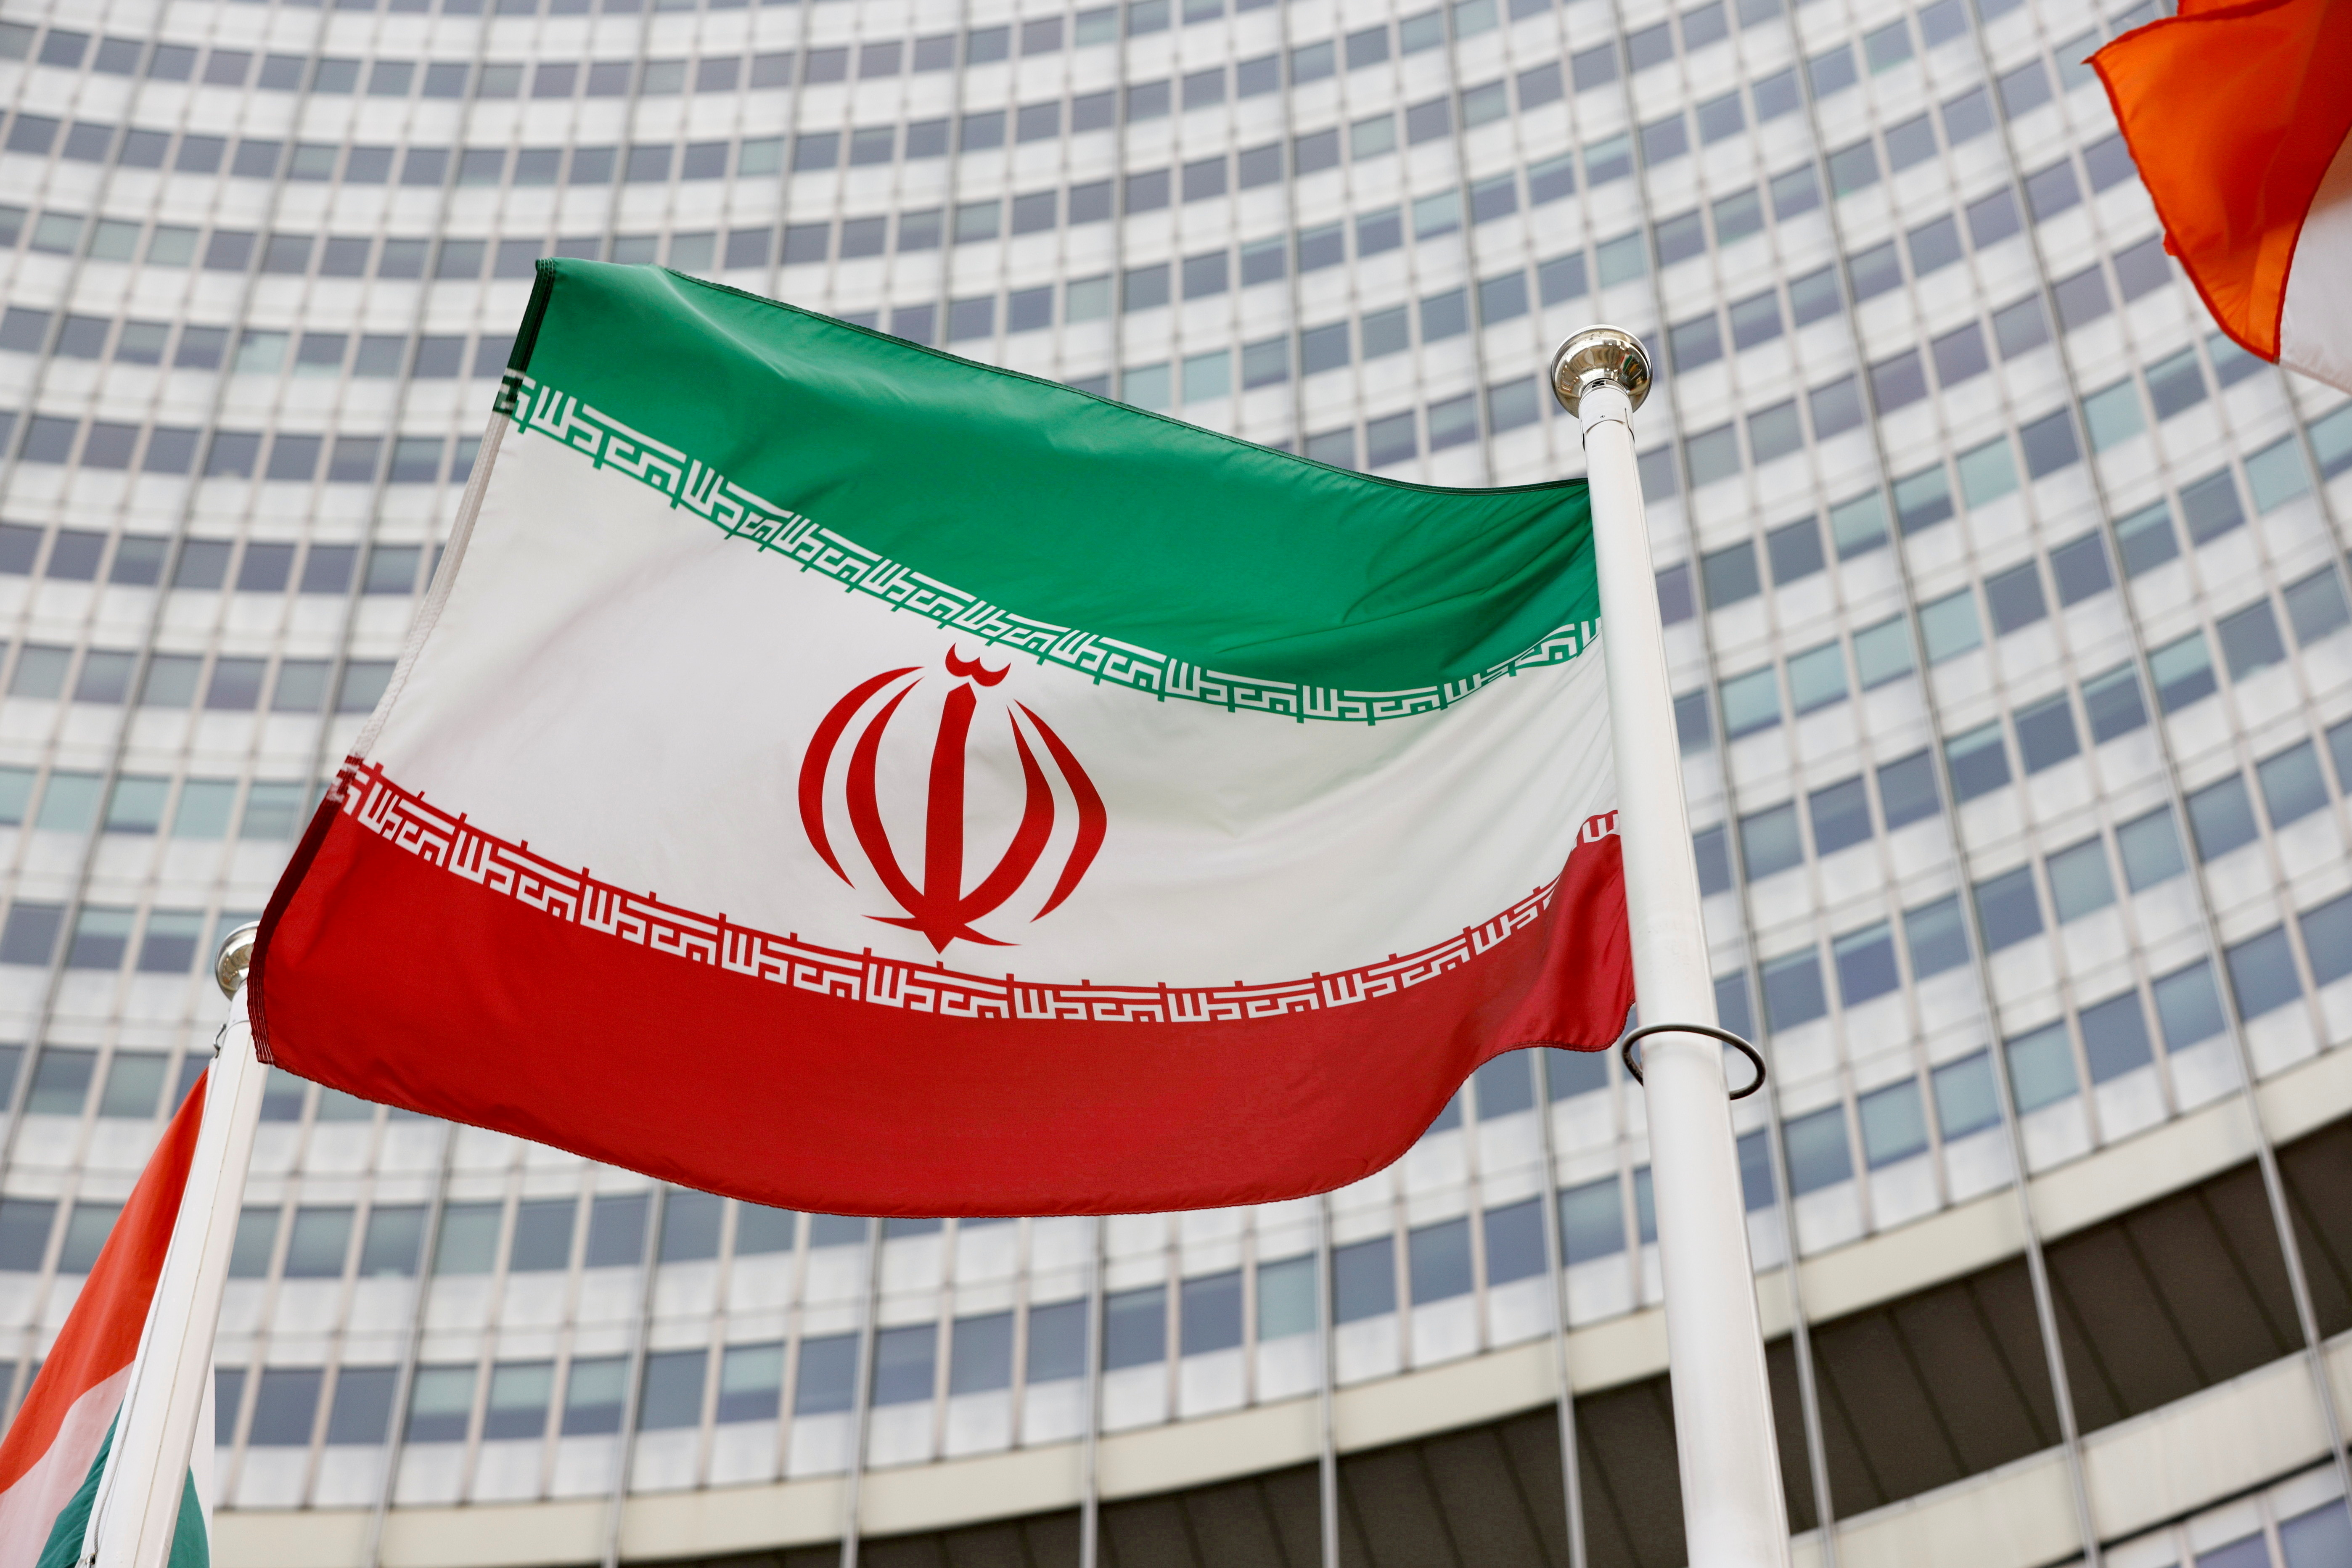 The Iranian flag waves in front of the International Atomic Energy Agency (IAEA) headquarters in Vienna, Austria May 23, 2021. REUTERS/Leonhard Foeger/File Photo